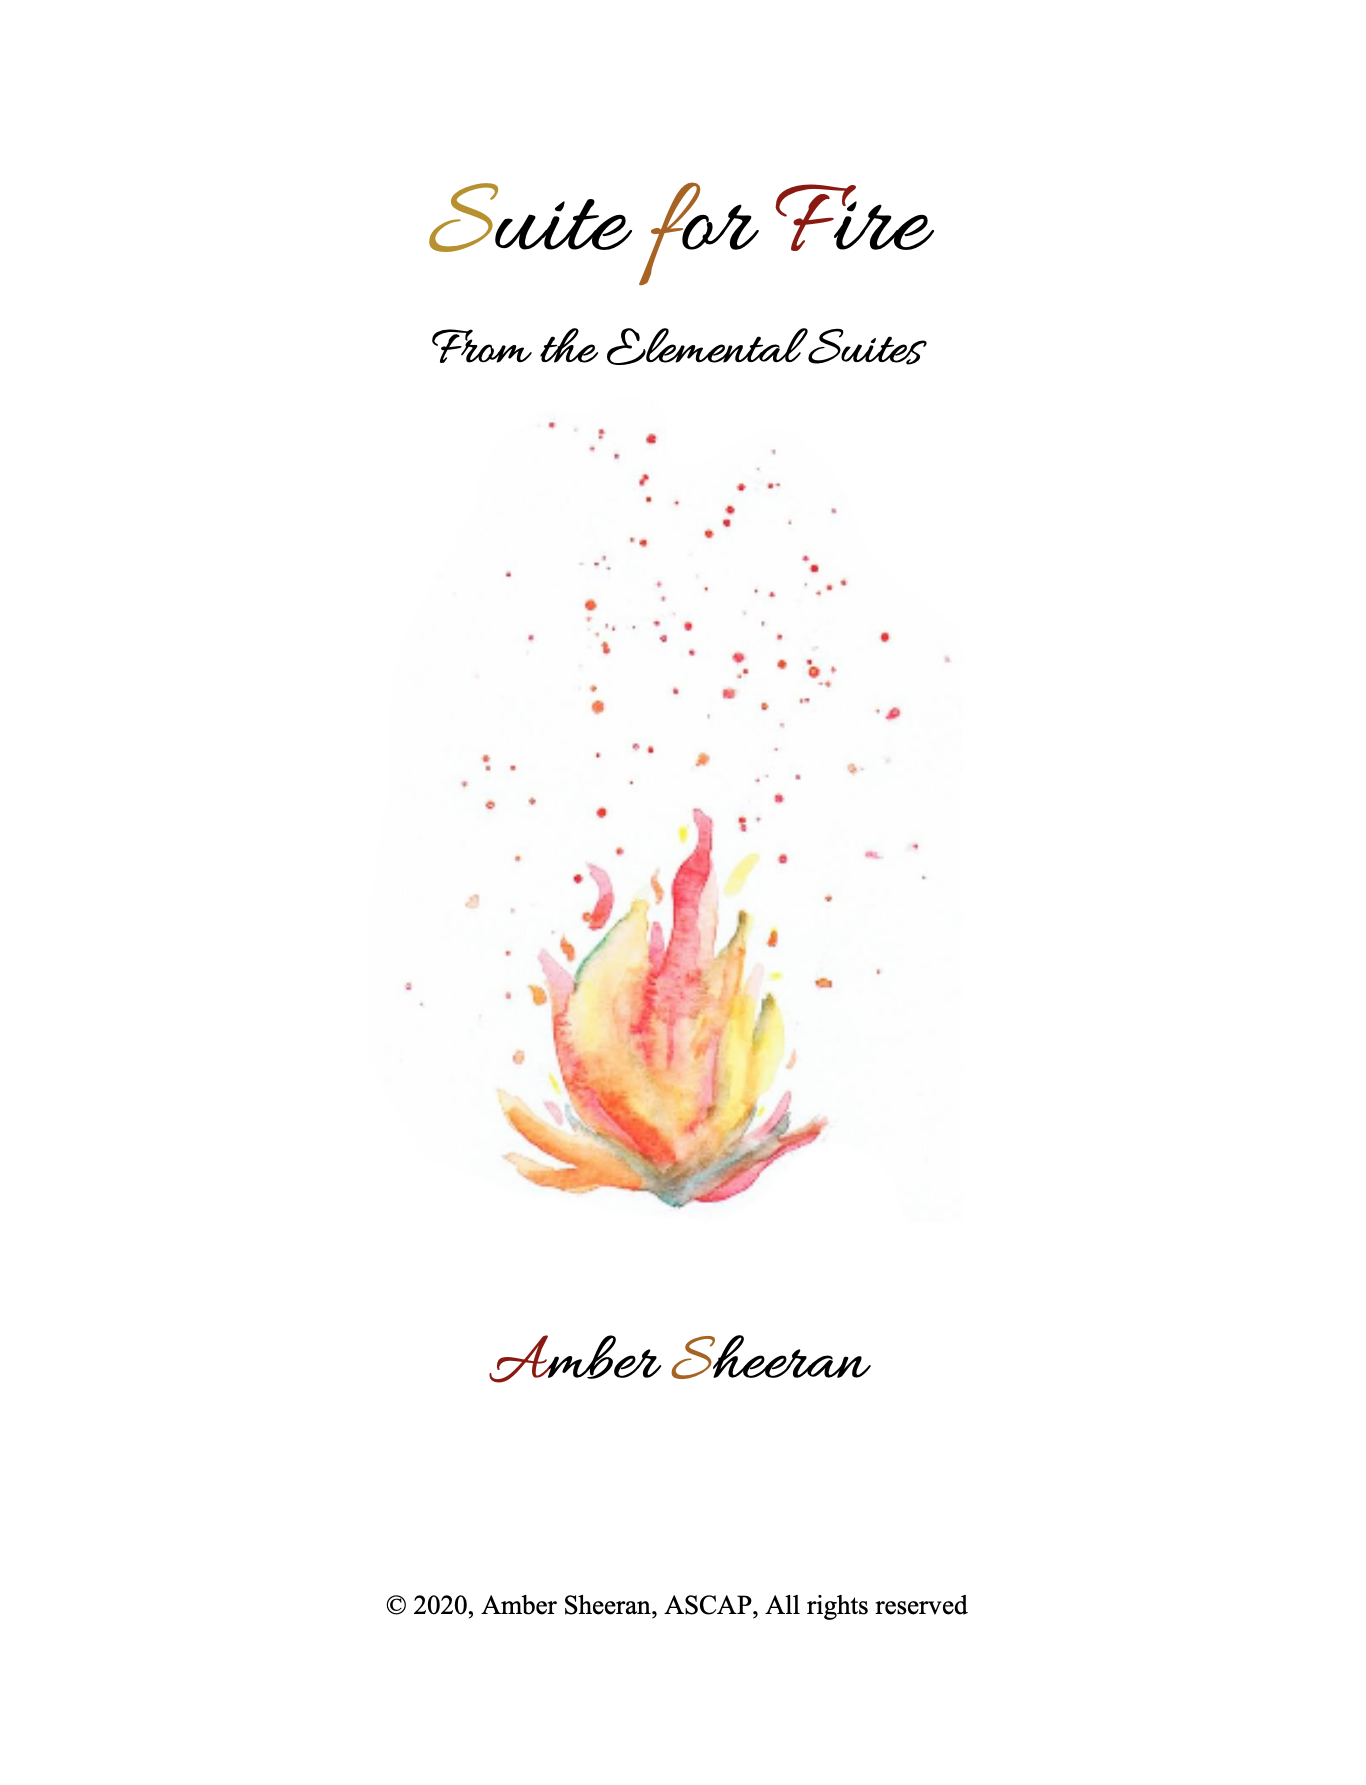 Suite For Fire by Amber Sheeran